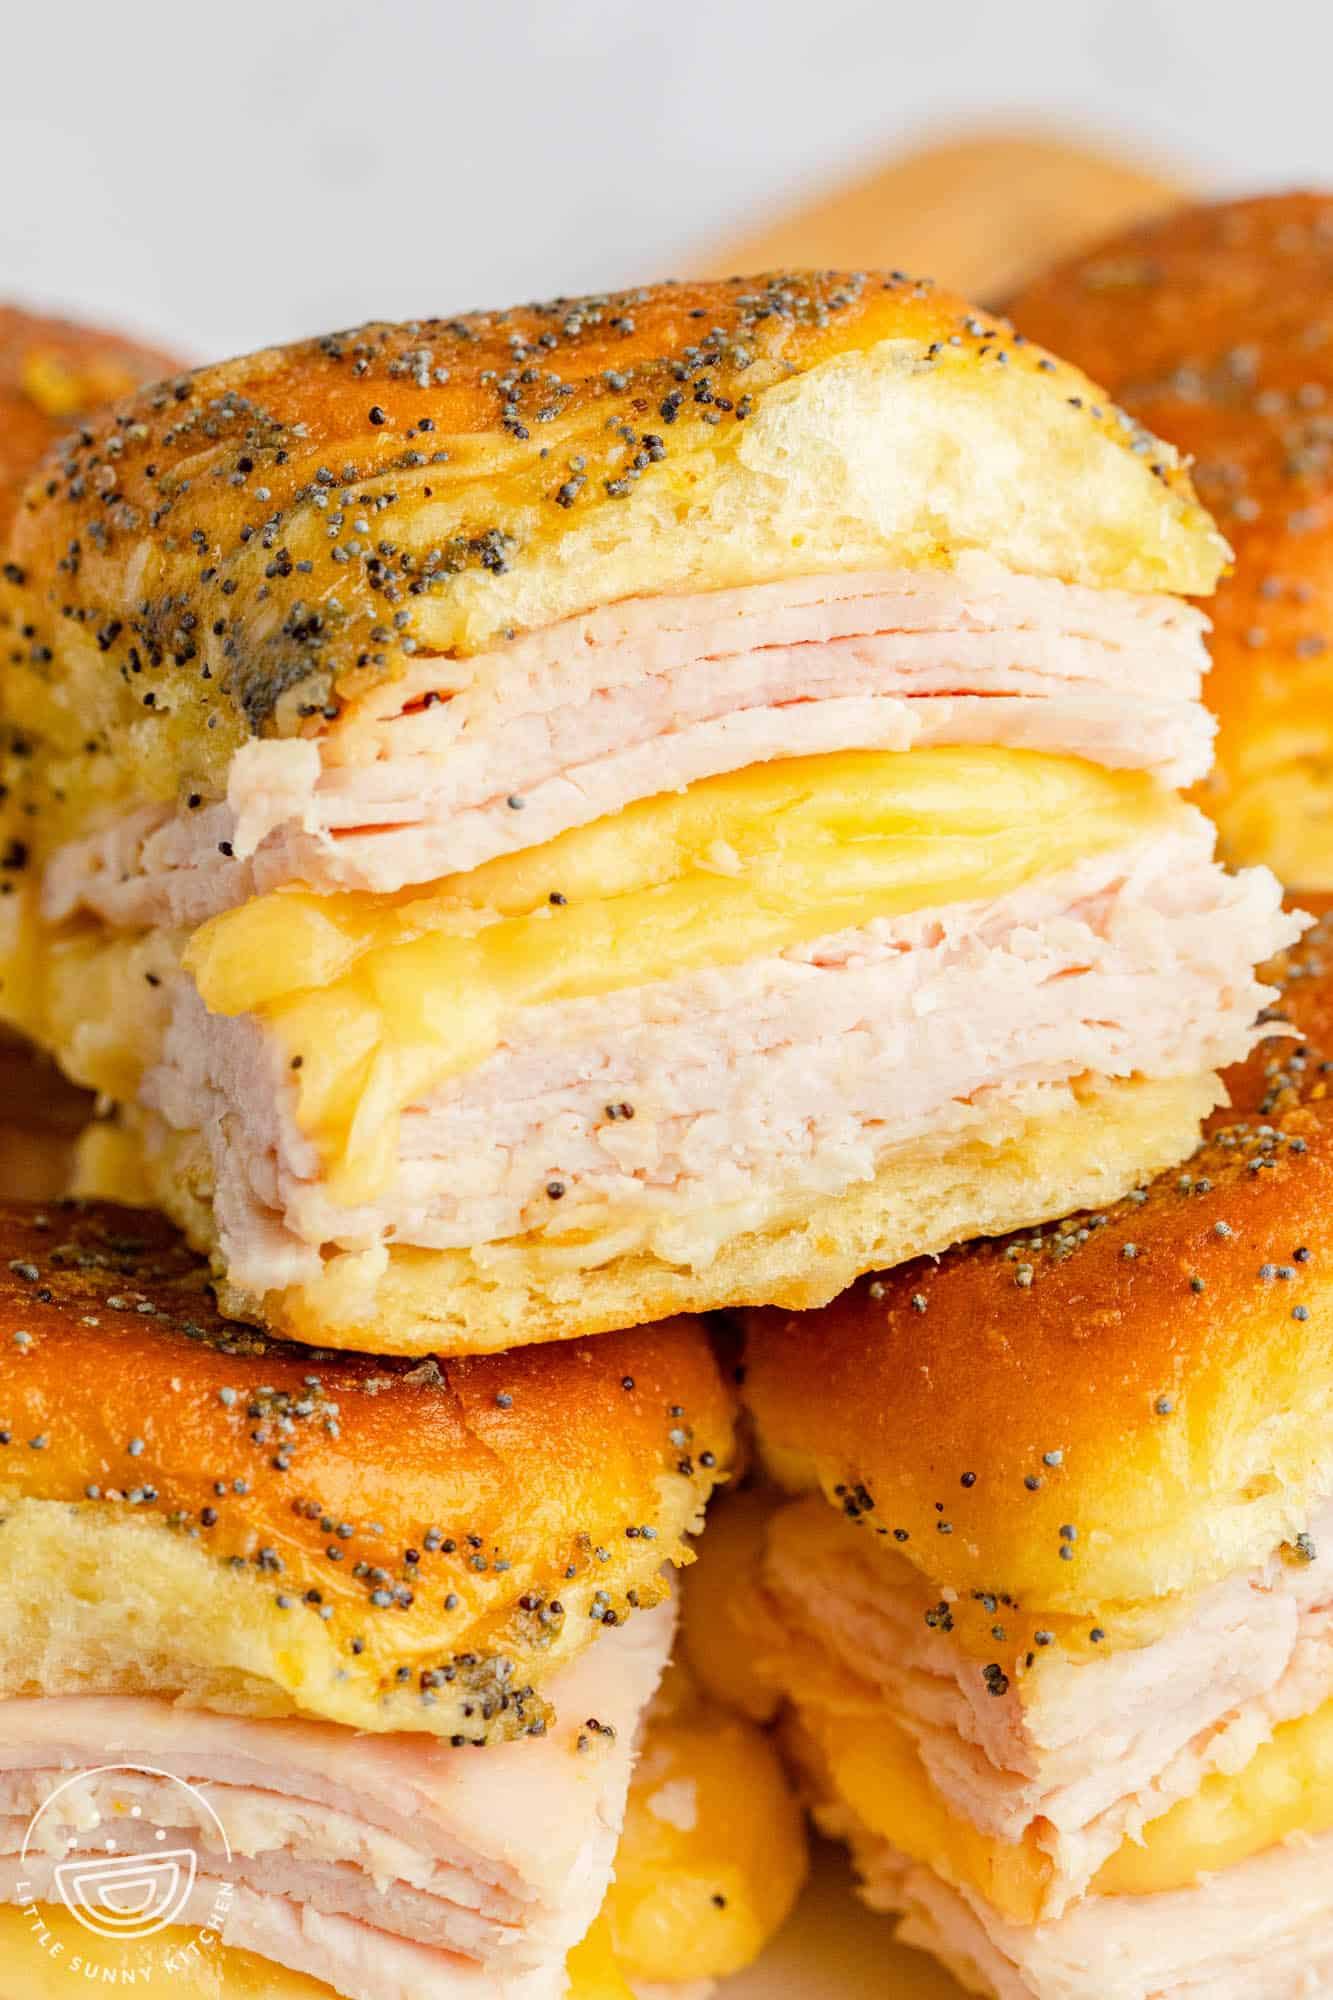 Turkey and cheese sliders stacked on top of each other. There are two layers of turkey with melty cheese in between.